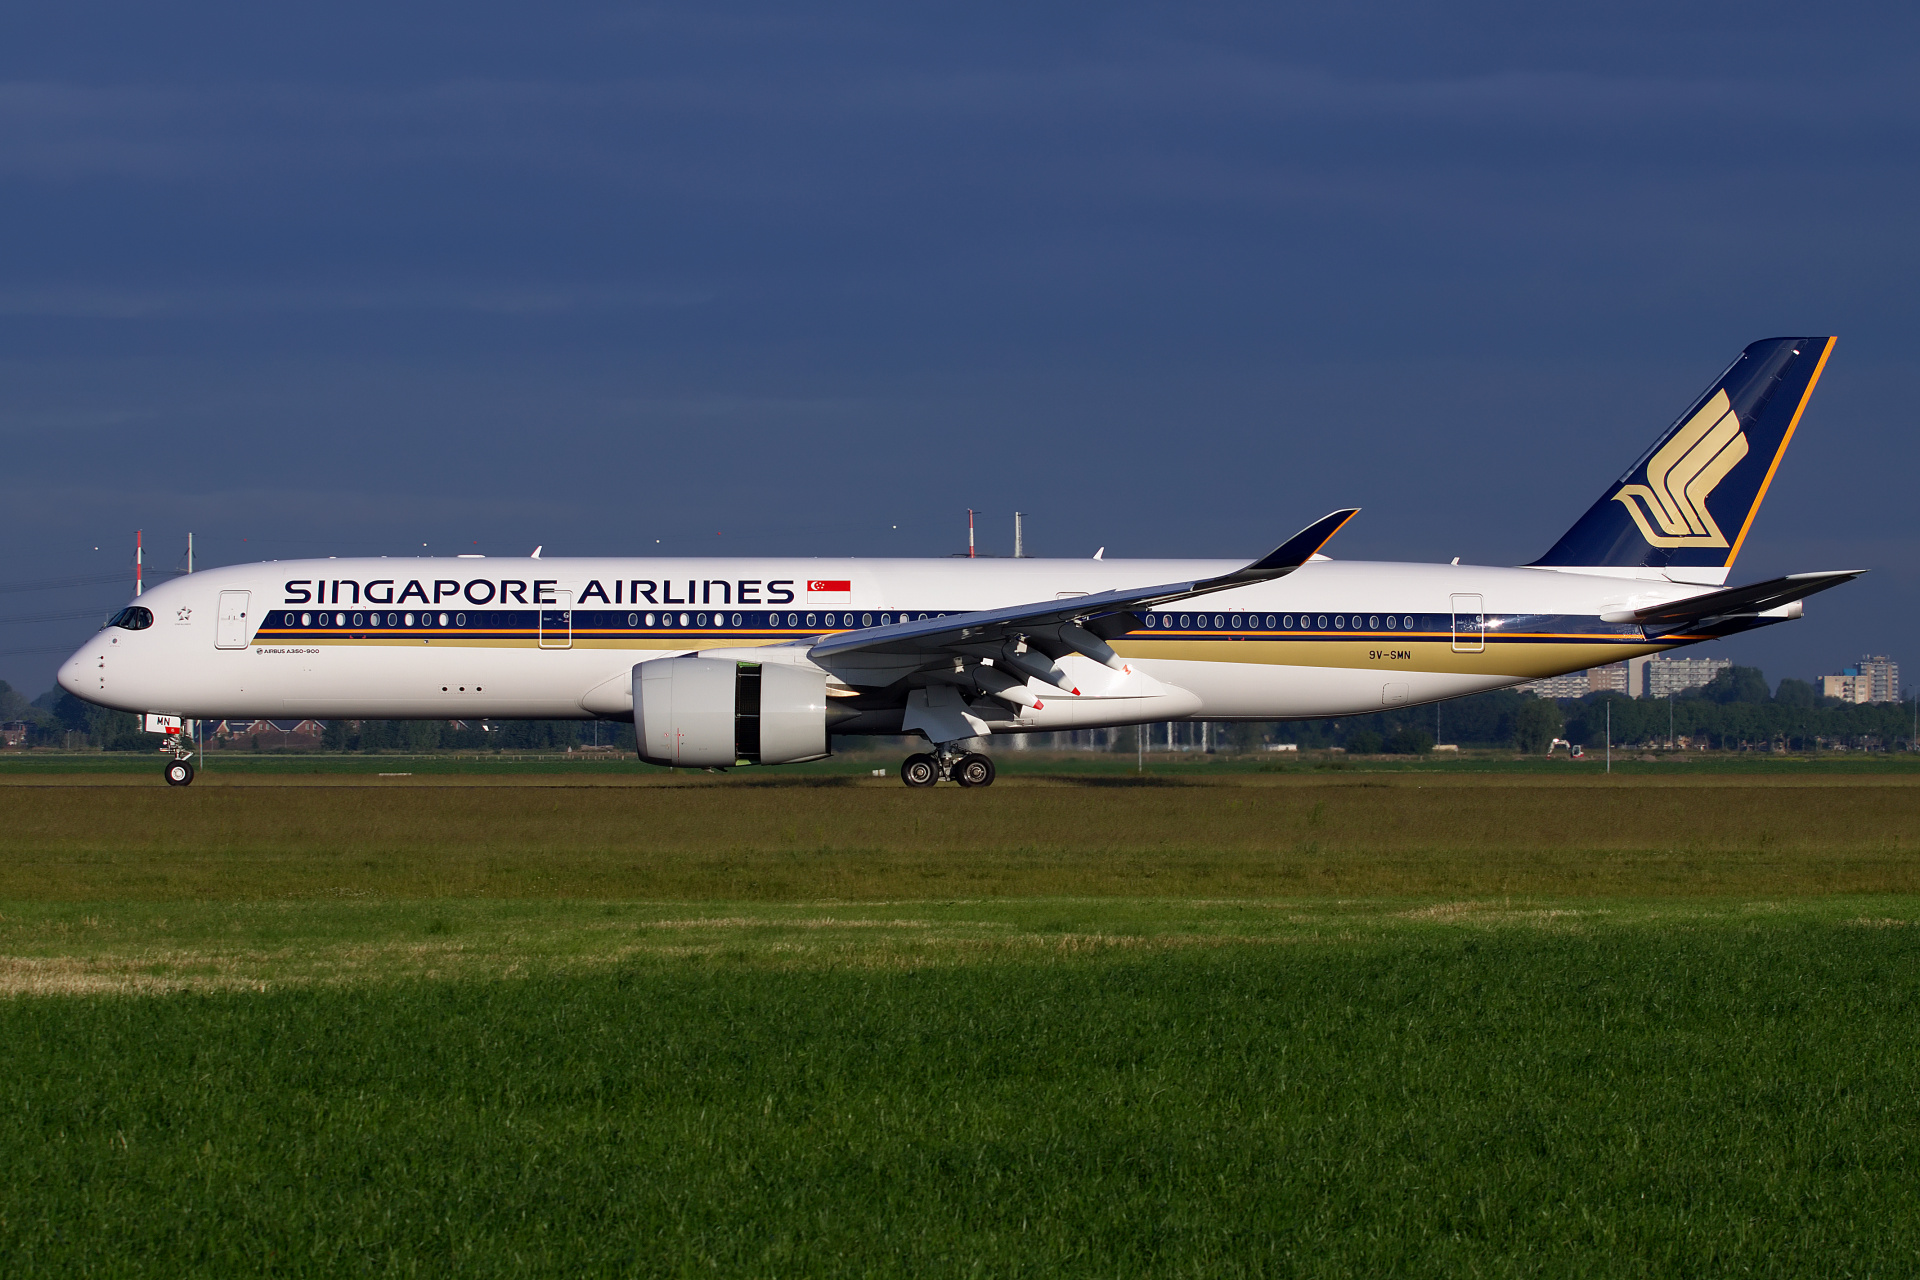 9V-SMN, Singapore Airlines (Aircraft » Schiphol Spotting » Airbus A350-900)